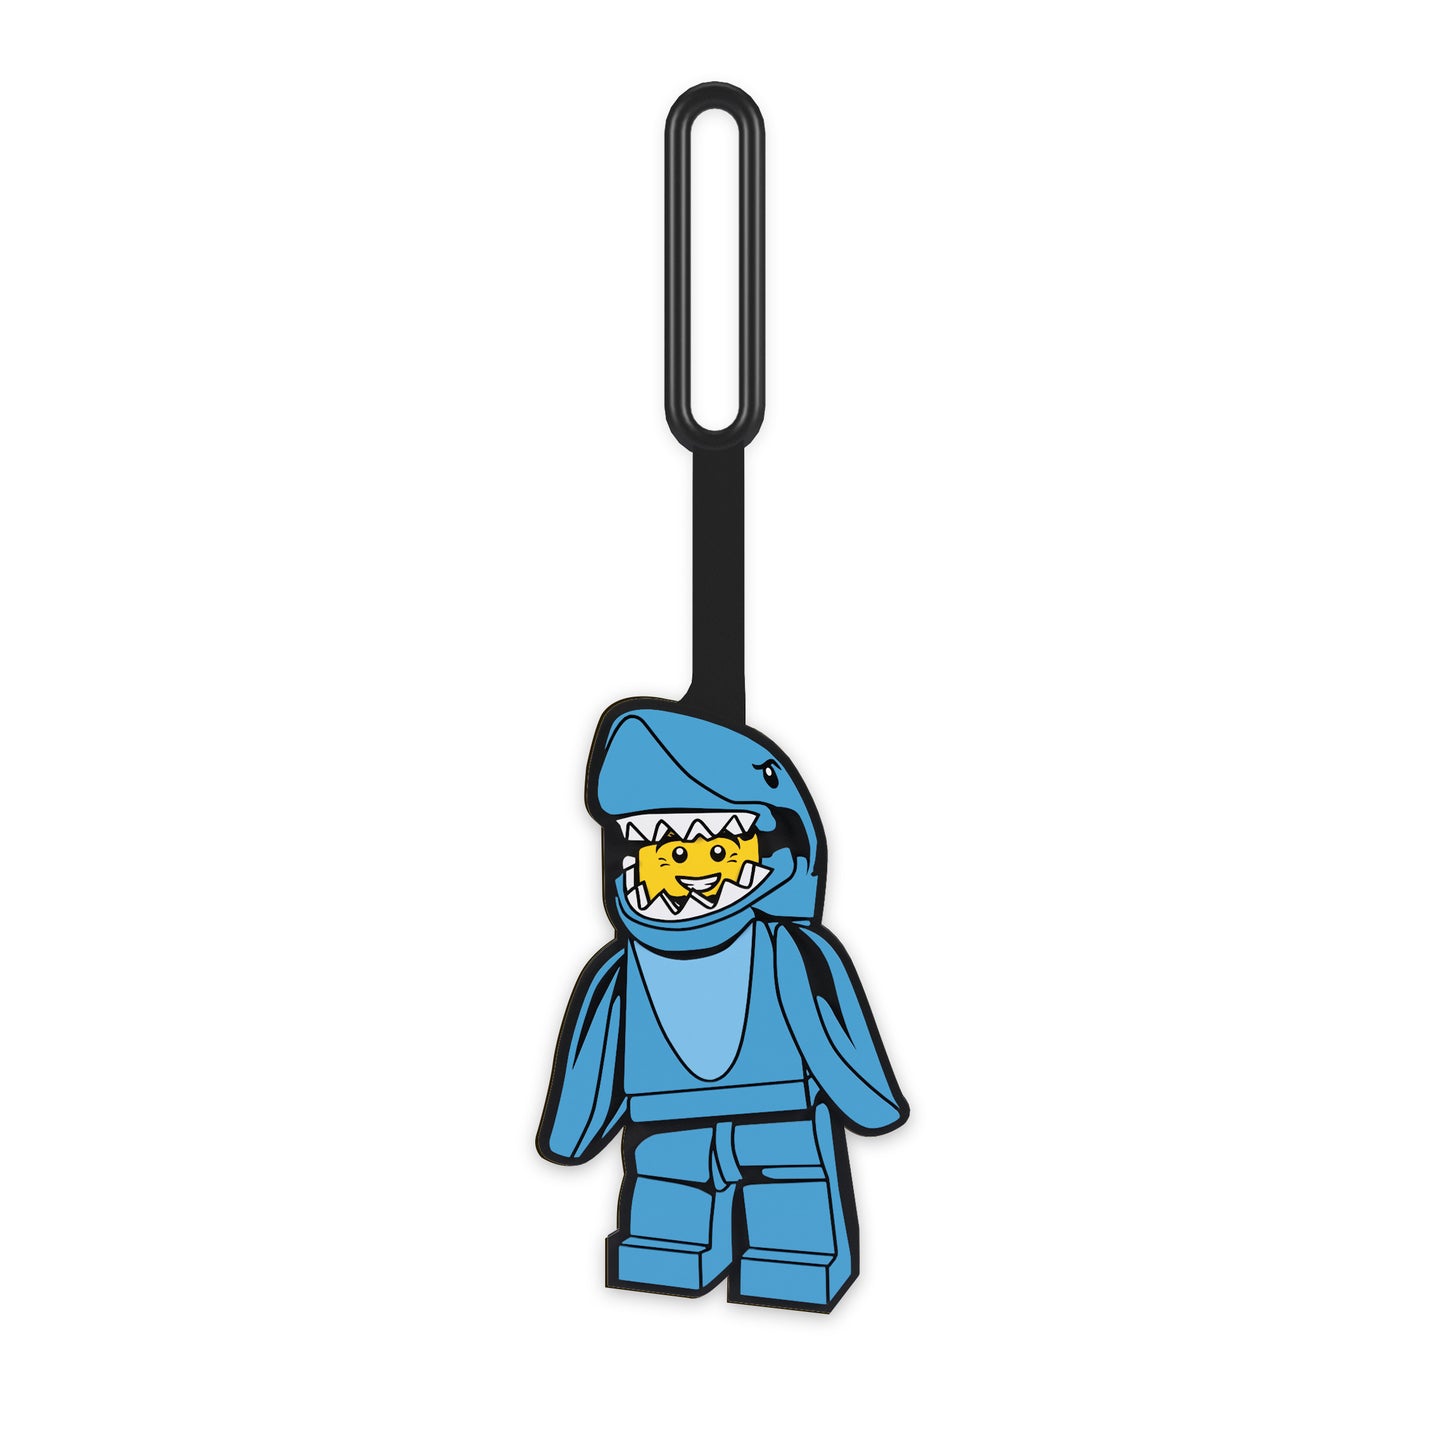 IQ LEGO® Iconic Shark Sult Guy Bag Tag (52540)